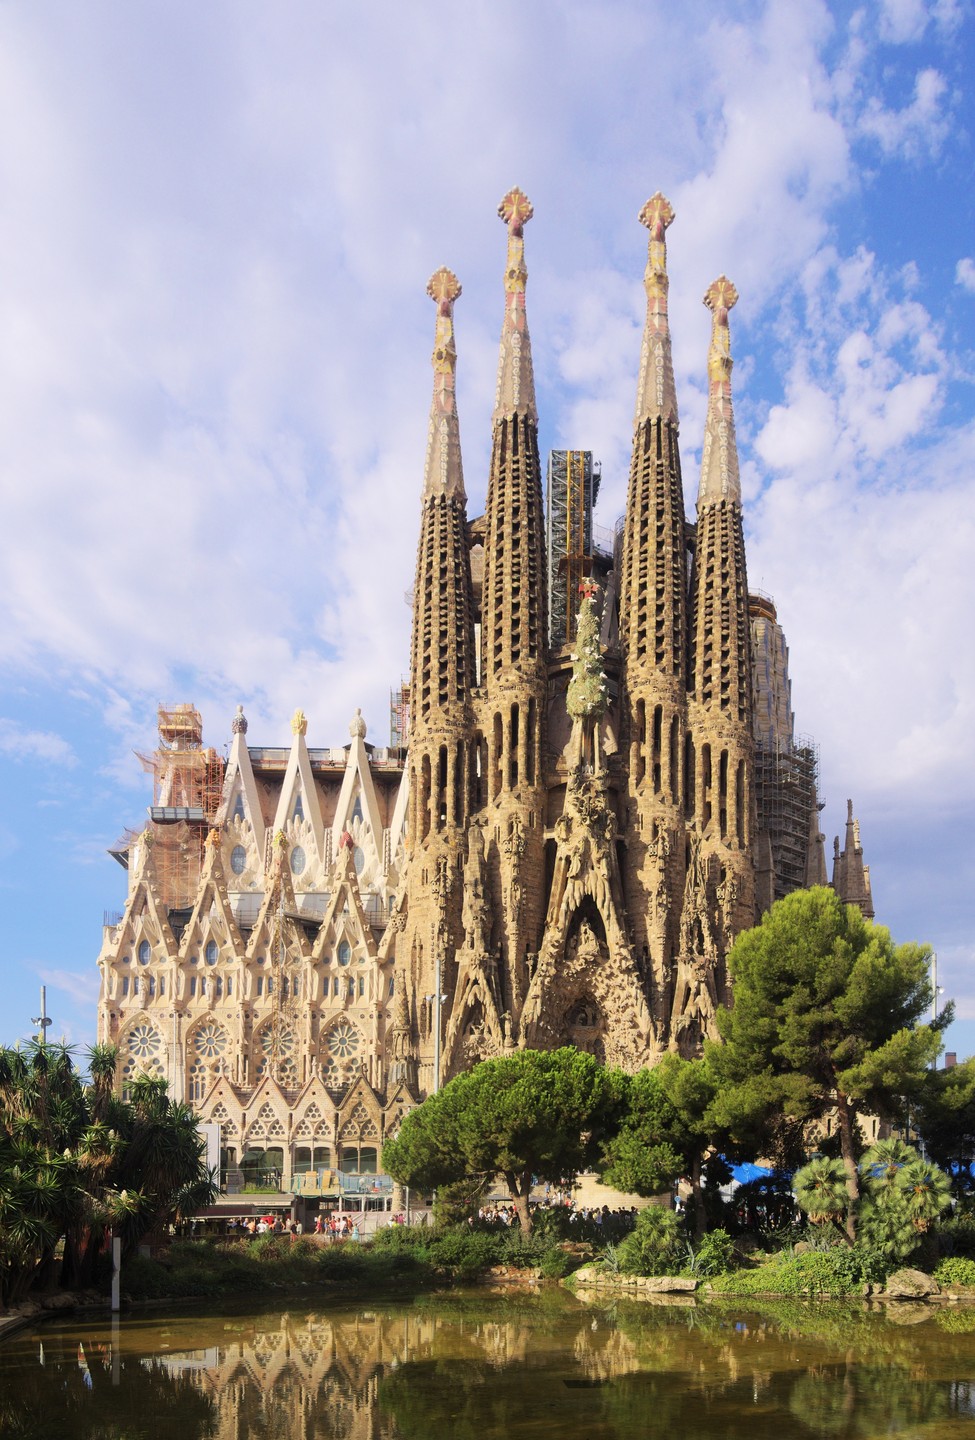 The construction of the Sagrada Familia is finally legalized!